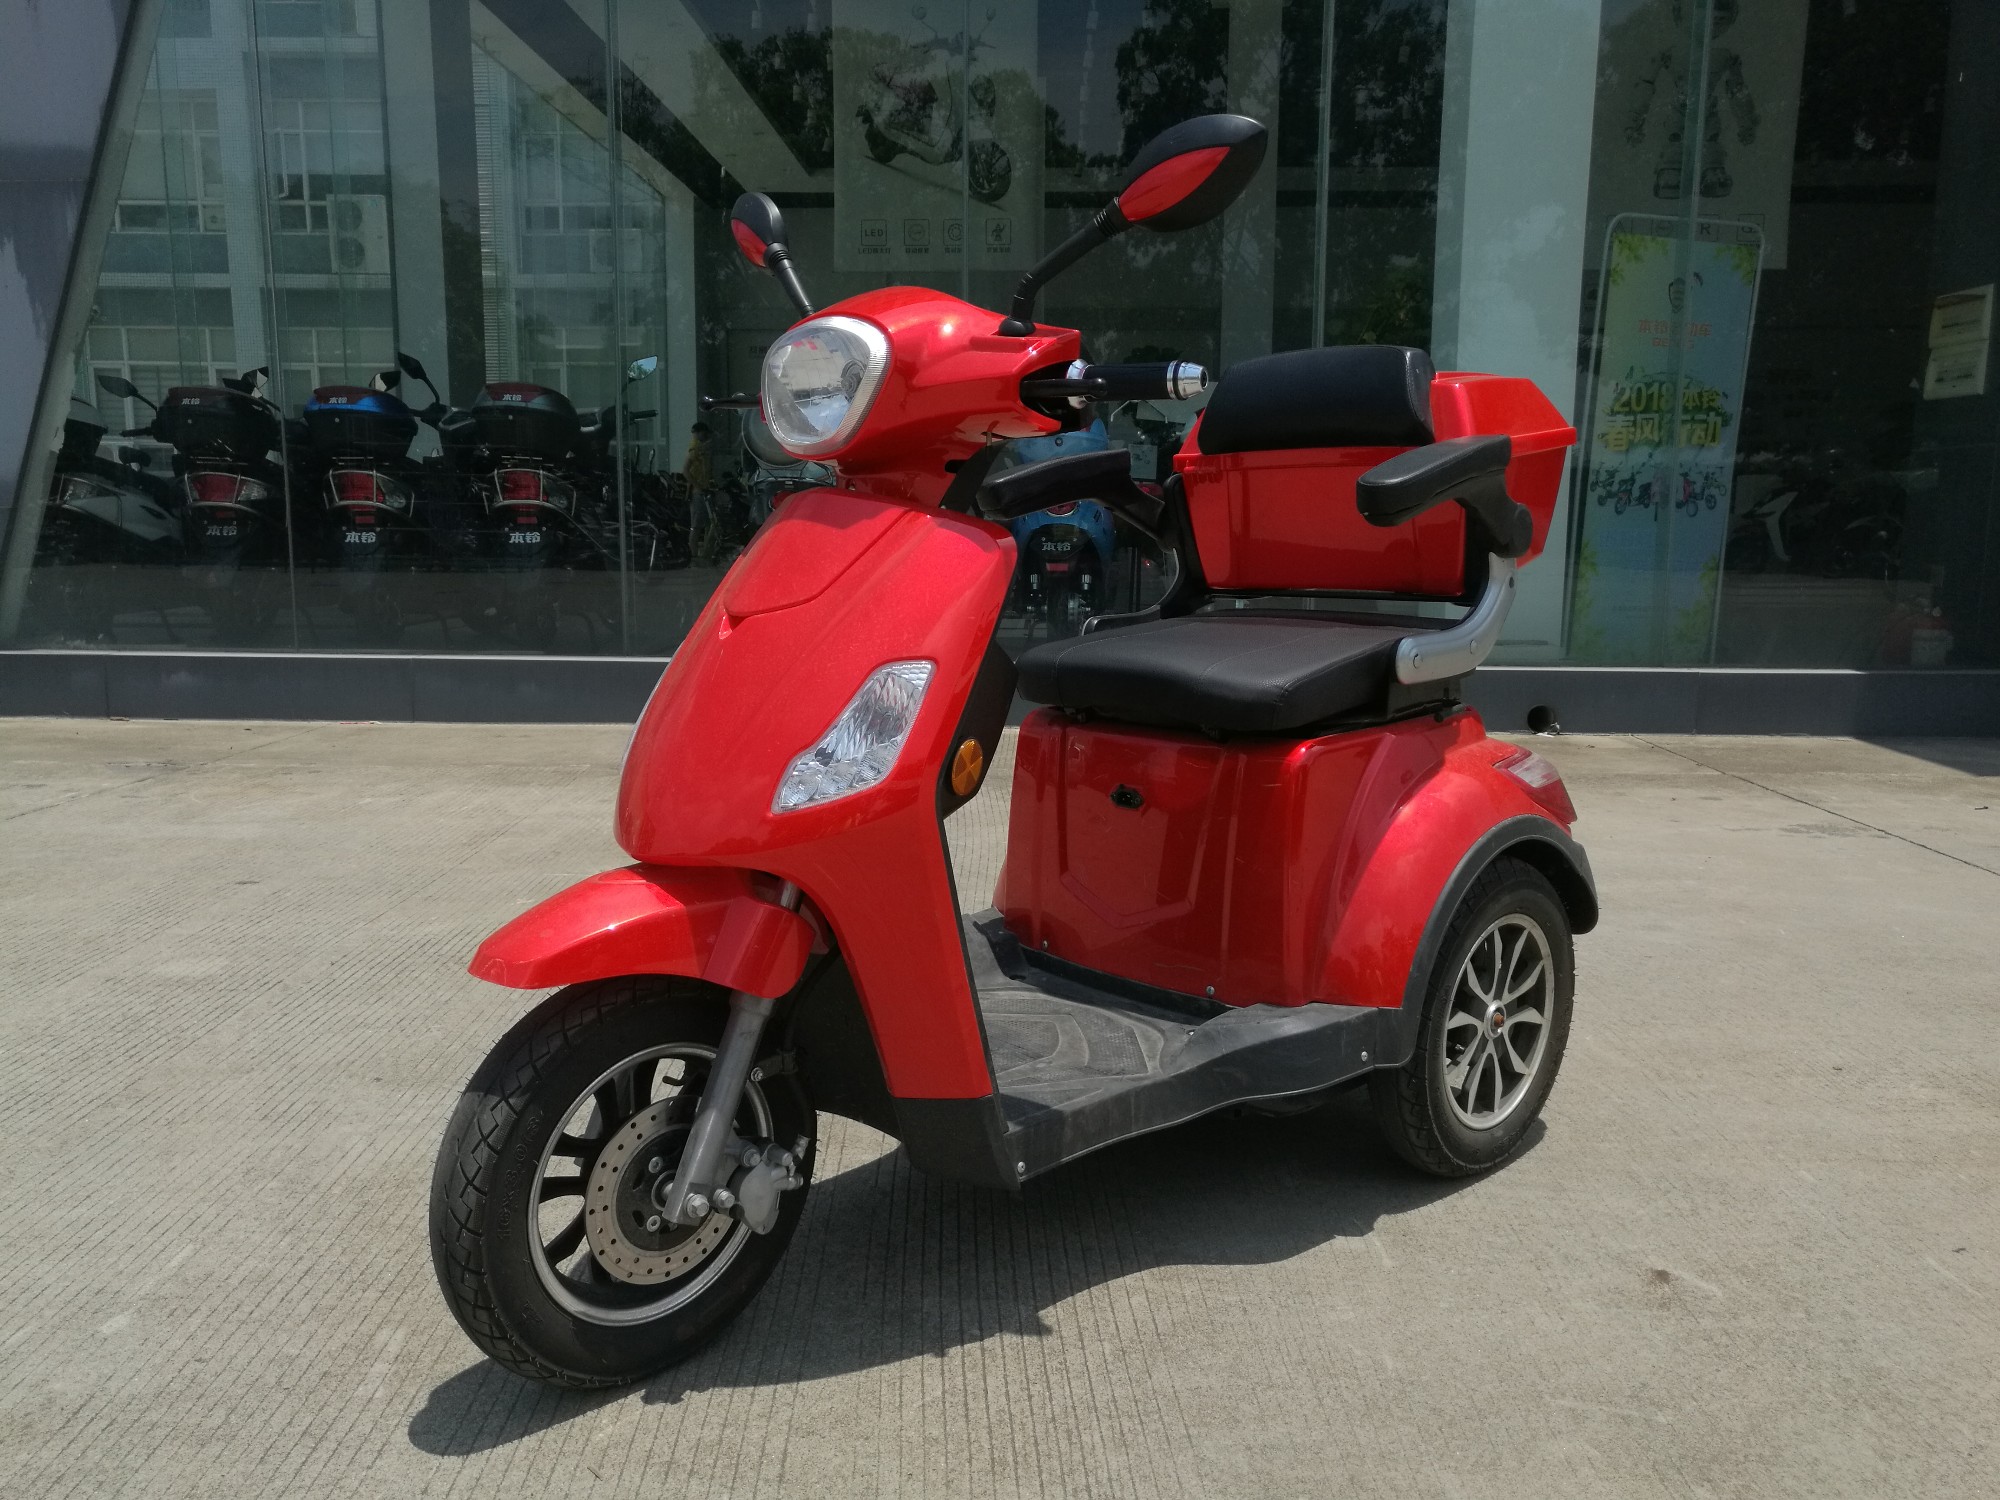 Koop Passenger Electric Tricycle. Passenger Electric Tricycle Prijzen. Passenger Electric Tricycle Brands. Passenger Electric Tricycle Fabrikant. Passenger Electric Tricycle Quotes. Passenger Electric Tricycle Company.